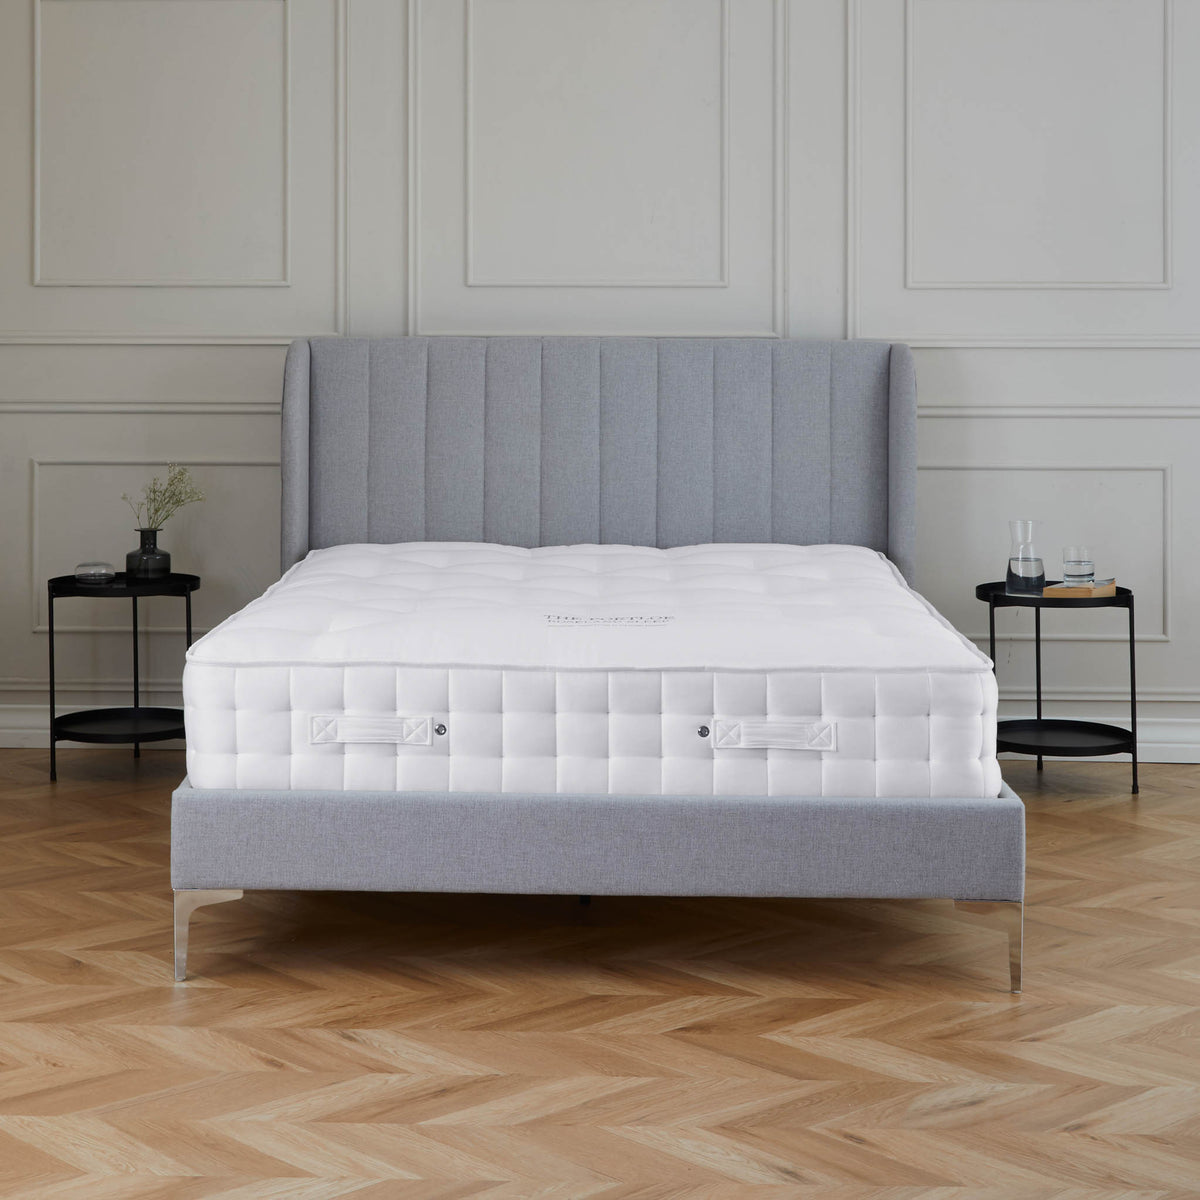 Ramona grey faux wool upholstered bed frame